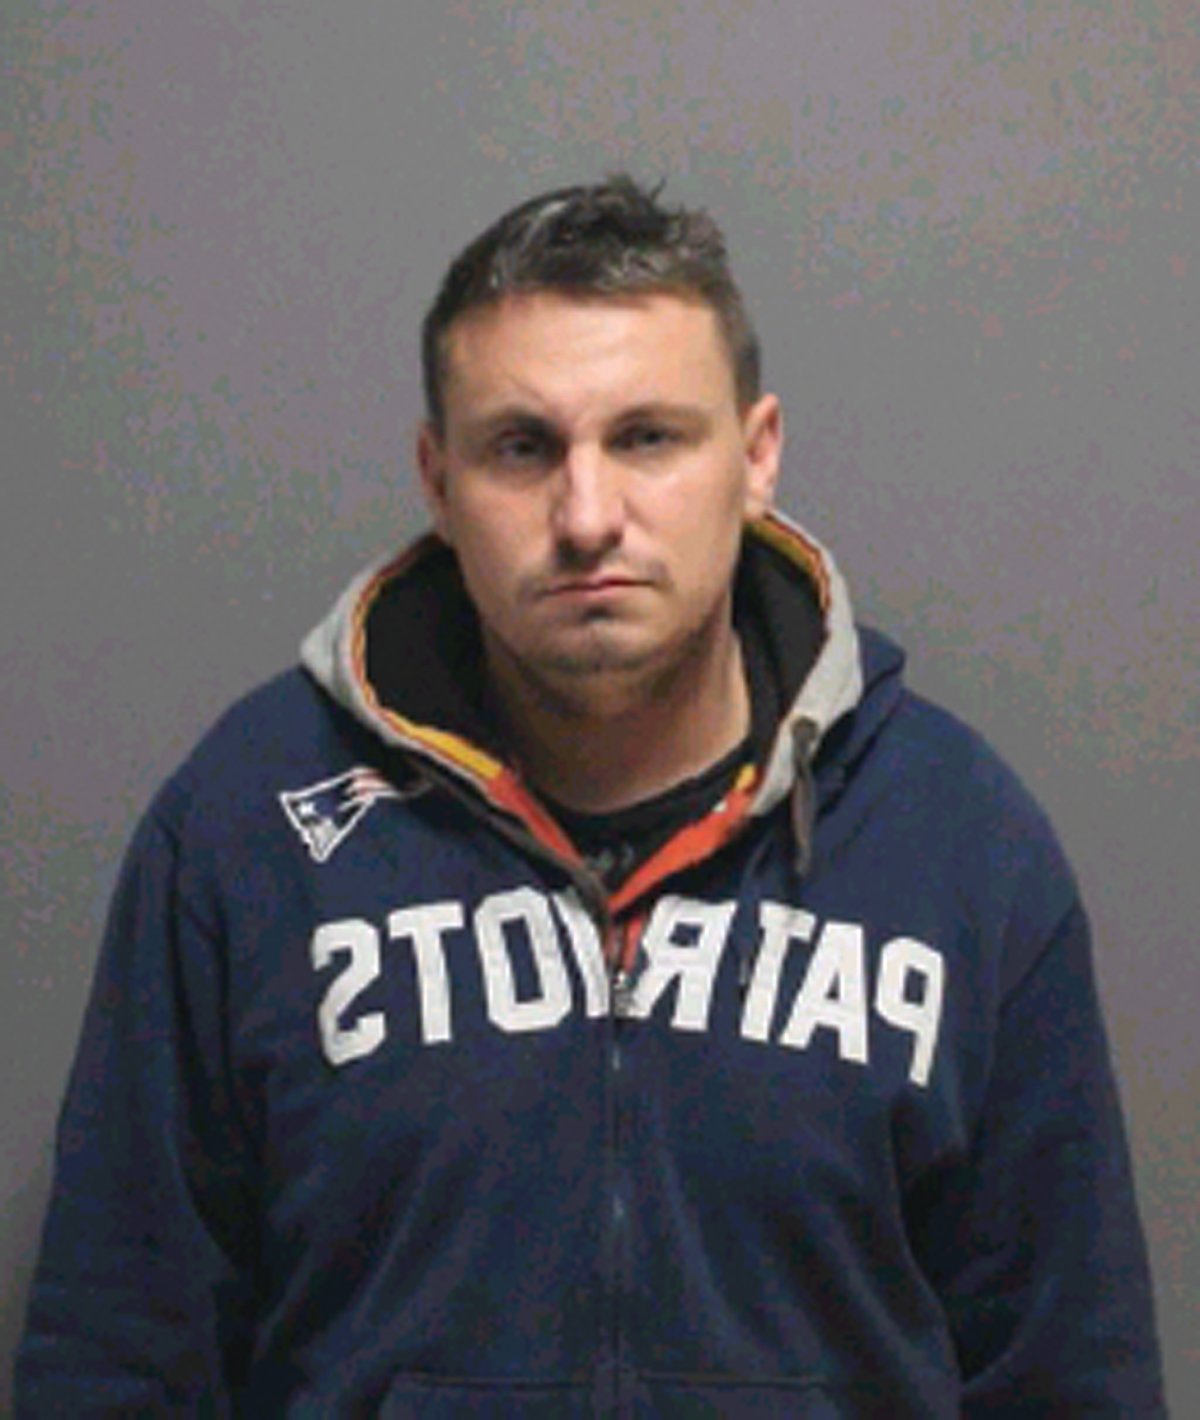 Paul M. Sawyer, 35, of 283 Mowry St., Apt. 2, Woonsocket, has been arrested by Cranston Police and charged with Breaking and Entering and Indecent Exposure/Disorderly Conduct following two separate incidents a few hours apart during the early morning hours of Dec. 22.